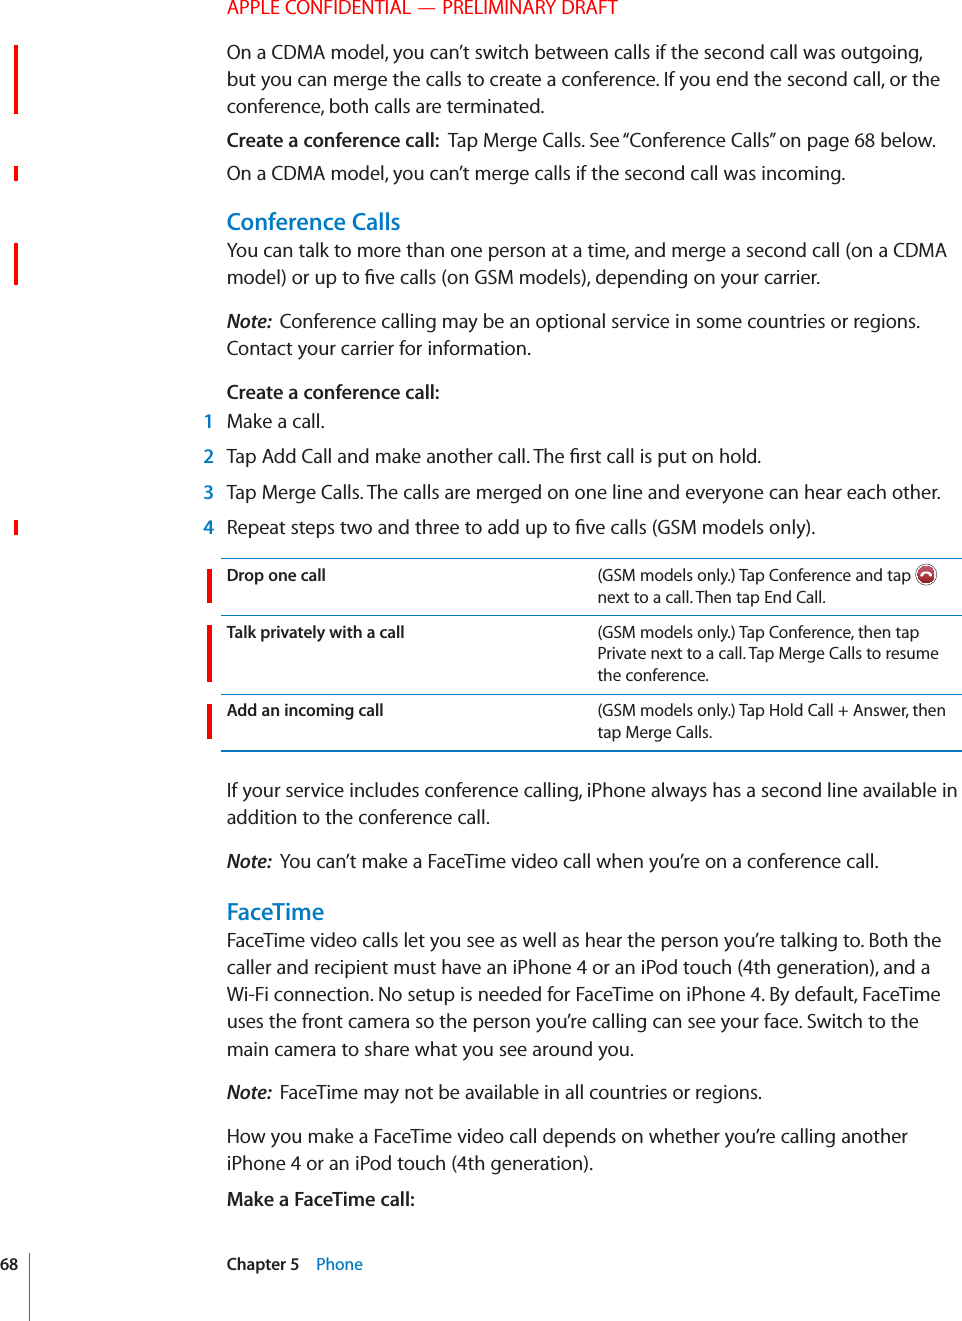 APPLE CONFIDENTIAL — PRELIMINARY DRAFTOn a CDMA model, you can’t switch between calls if the second call was outgoing, but you can merge the calls to create a conference. If you end the second call, or the conference, both calls are terminated.Create a conference call:  Tap Merge Calls. See “Conference Calls” on page 68 below. On a CDMA model, you can’t merge calls if the second call was incoming.Conference CallsYou can talk to more than one person at a time, and merge a second call (on a CDMA Note:  Conference calling may be an optional service in some countries or regions. Contact your carrier for information.Create a conference call:   1  Make a call. 2  3  Tap Merge Calls. The calls are merged on one line and everyone can hear each other. 4 Drop one call (GSM models only.) Tap Conference and tap   next to a call. Then tap End Call.Talk privately with a call (GSM models only.) Tap Conference, then tap Private next to a call. Tap Merge Calls to resume the conference.Add an incoming call (GSM models only.) Tap Hold Call + Answer, then tap Merge Calls.If your service includes conference calling, iPhone always has a second line available in addition to the conference call.Note:  You can’t make a FaceTime video call when you’re on a conference call.FaceTimeFaceTime video calls let you see as well as hear the person you’re talking to. Both the caller and recipient must have an iPhone 4 or an iPod touch (4th generation), and a Wi-Fi connection. No setup is needed for FaceTime on iPhone 4. By default, FaceTime uses the front camera so the person you’re calling can see your face. Switch to the main camera to share what you see around you.Note:  FaceTime may not be available in all countries or regions.How you make a FaceTime video call depends on whether you’re calling another iPhone 4 or an iPod touch (4th generation).Make a FaceTime call:  68 Chapter 5    Phone